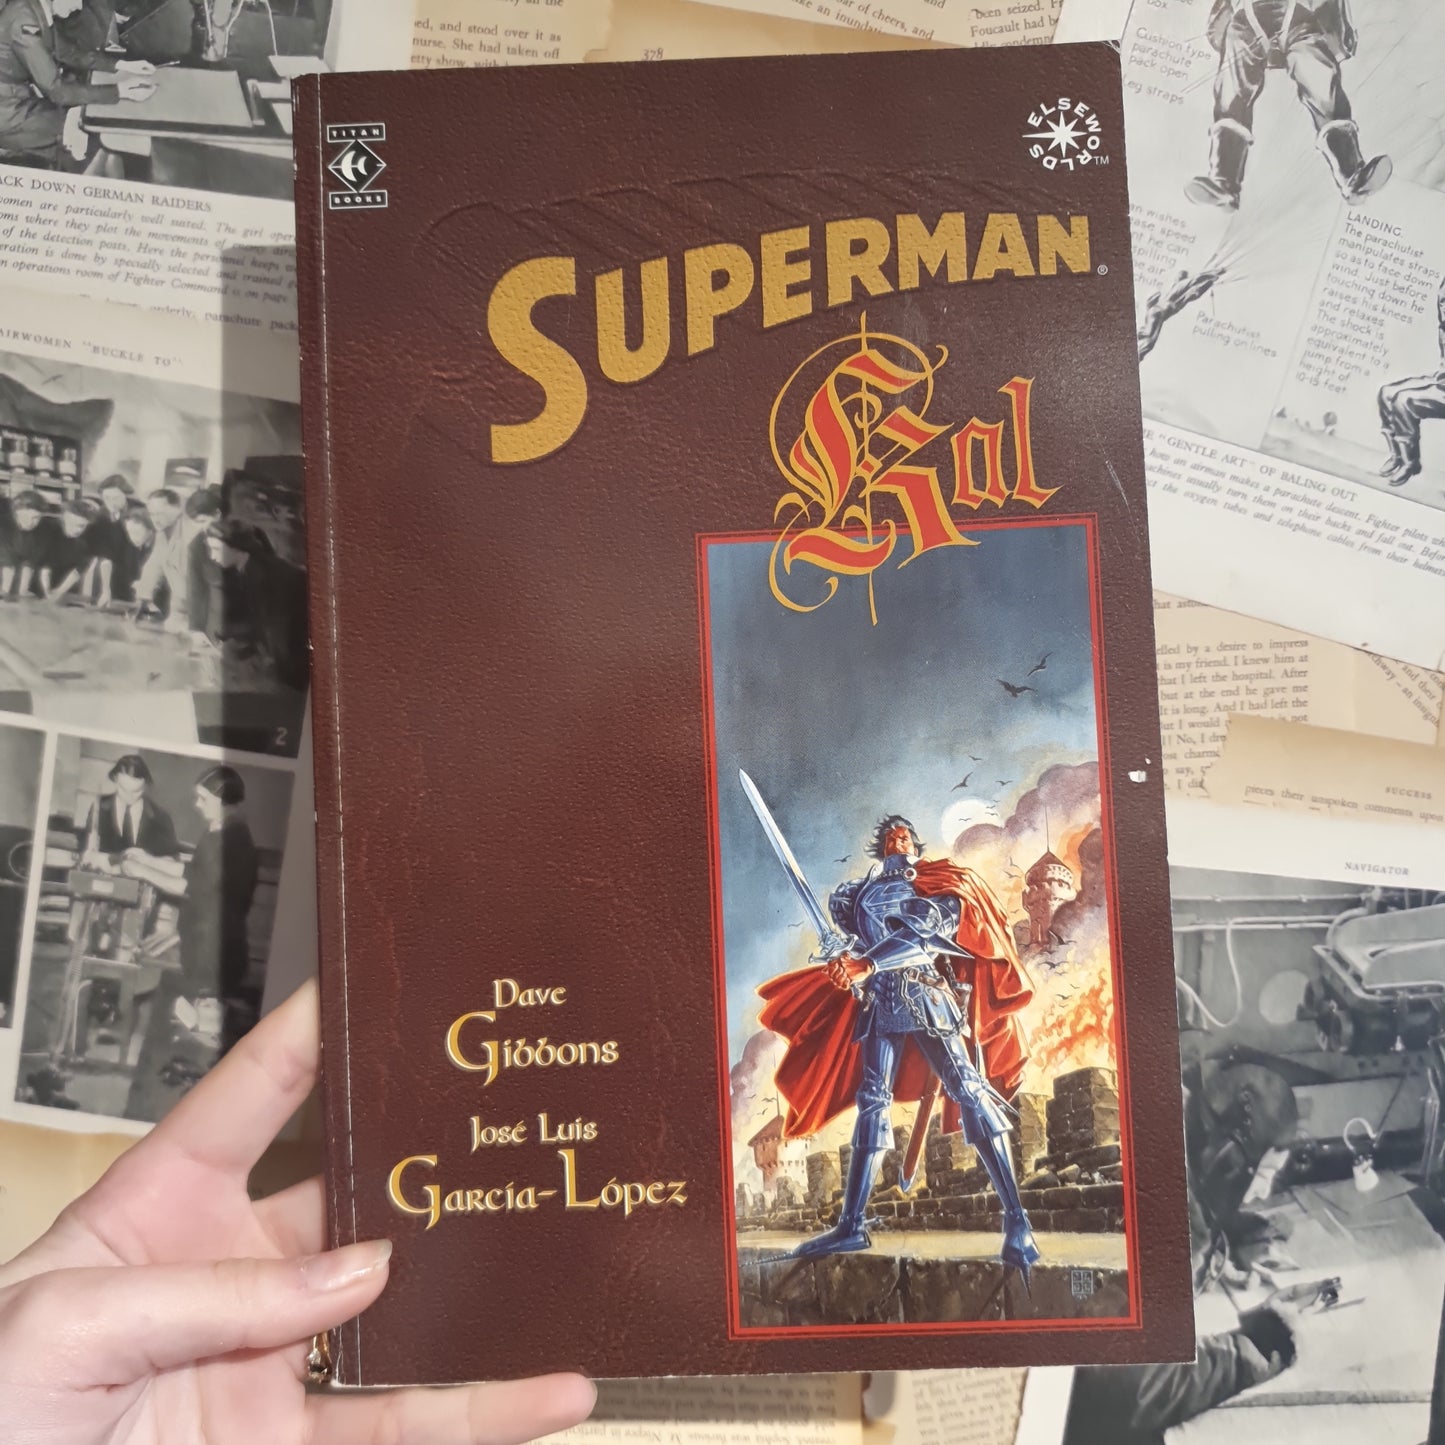 Superman Kal by Gibbons and Garcia-Lopez (1995)